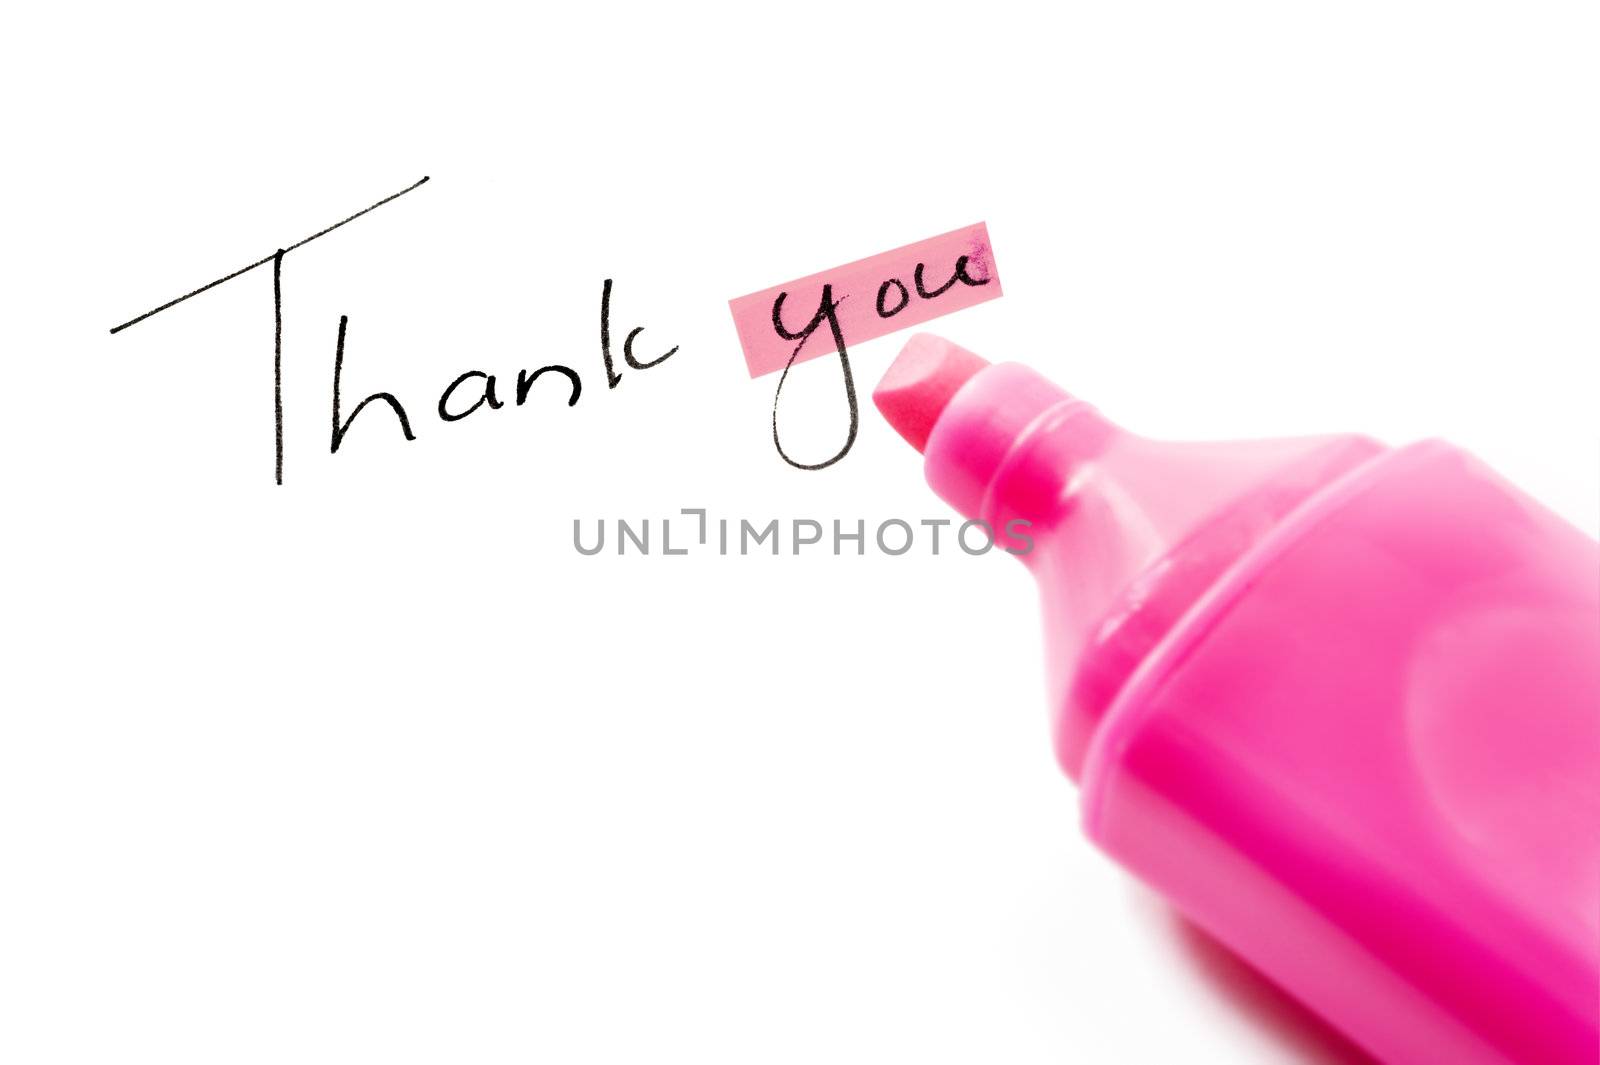 Thank you with hightlighter pen by tish1